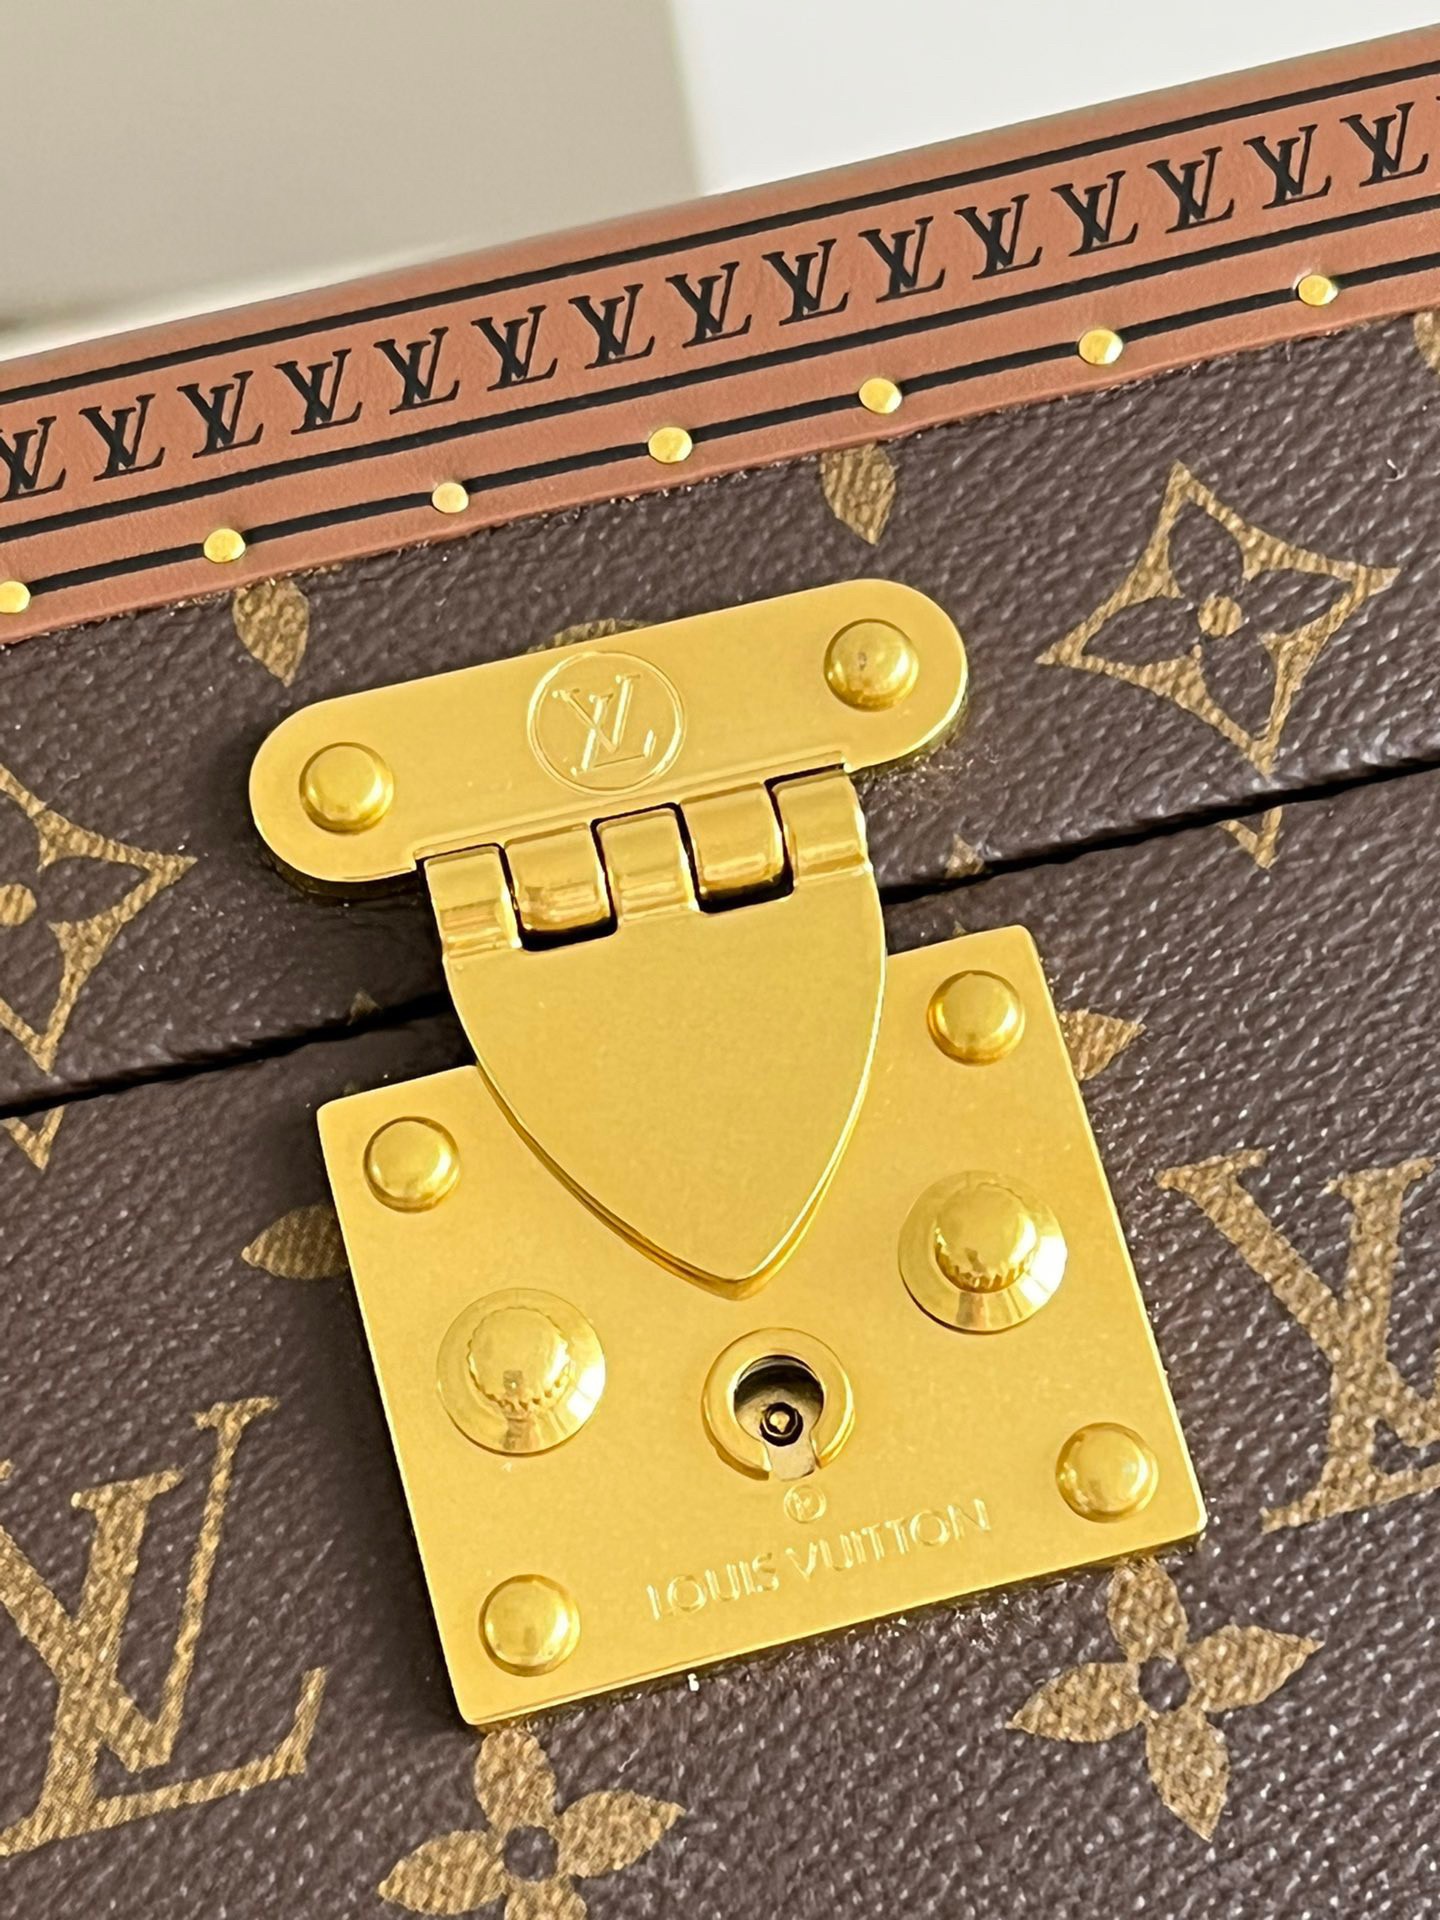 Louis Vuitton Coffret Accessoires - M20209 for $8,596 for sale from a  Trusted Seller on Chrono24